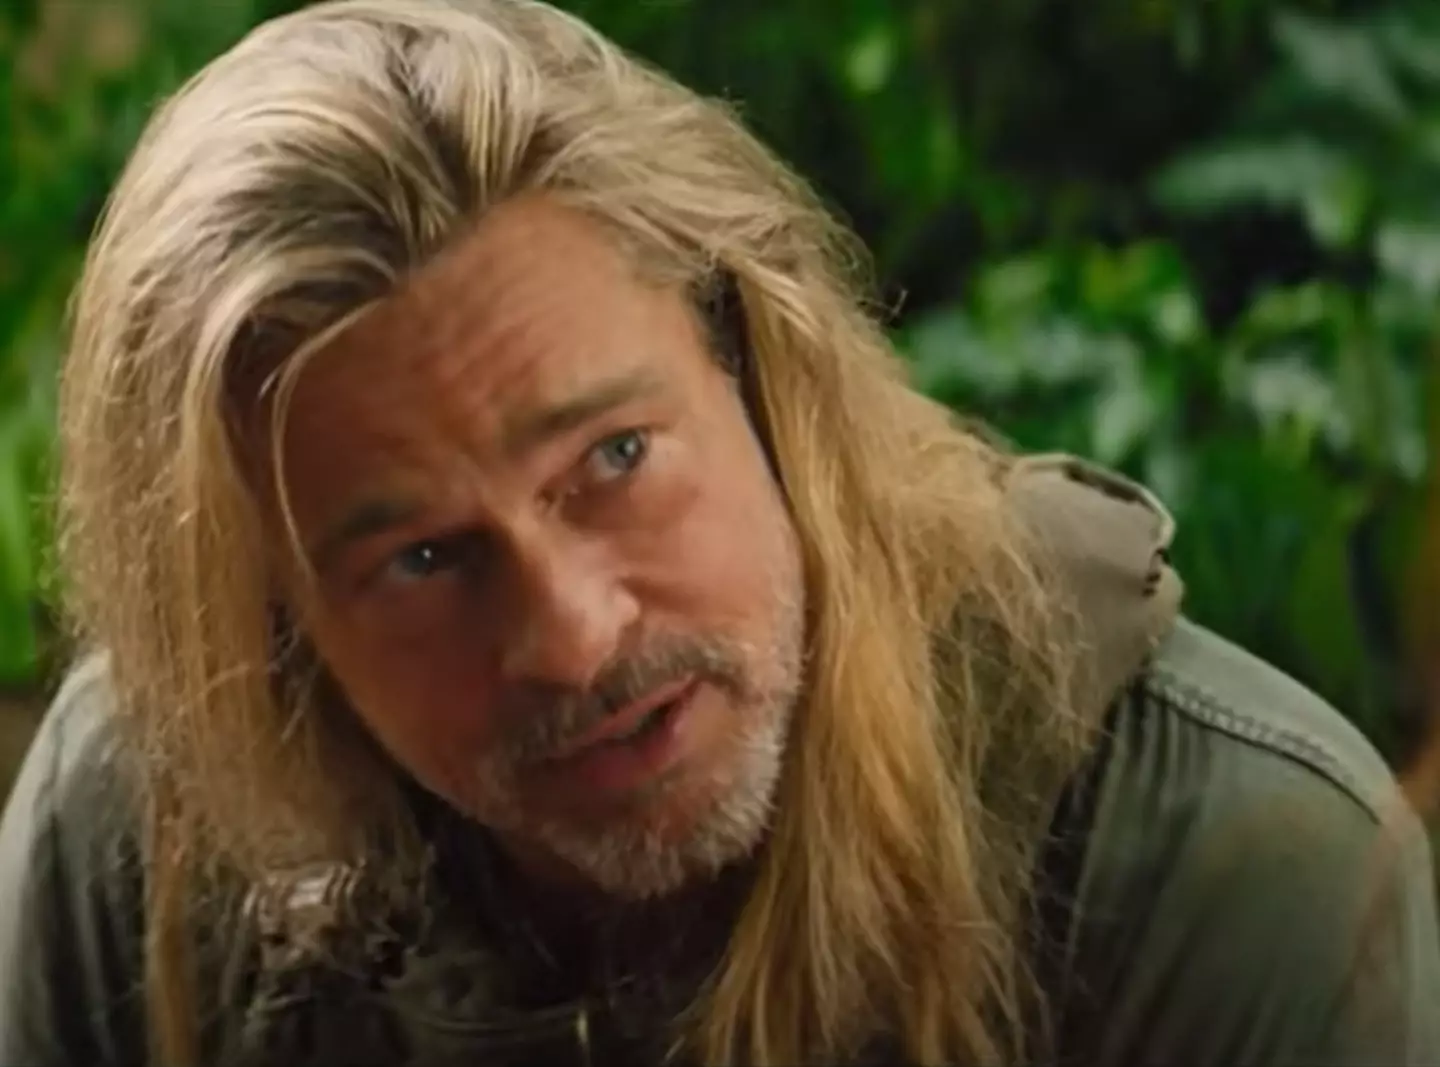 Brad Pitt was in The Lost City for a good time, not for a long time.